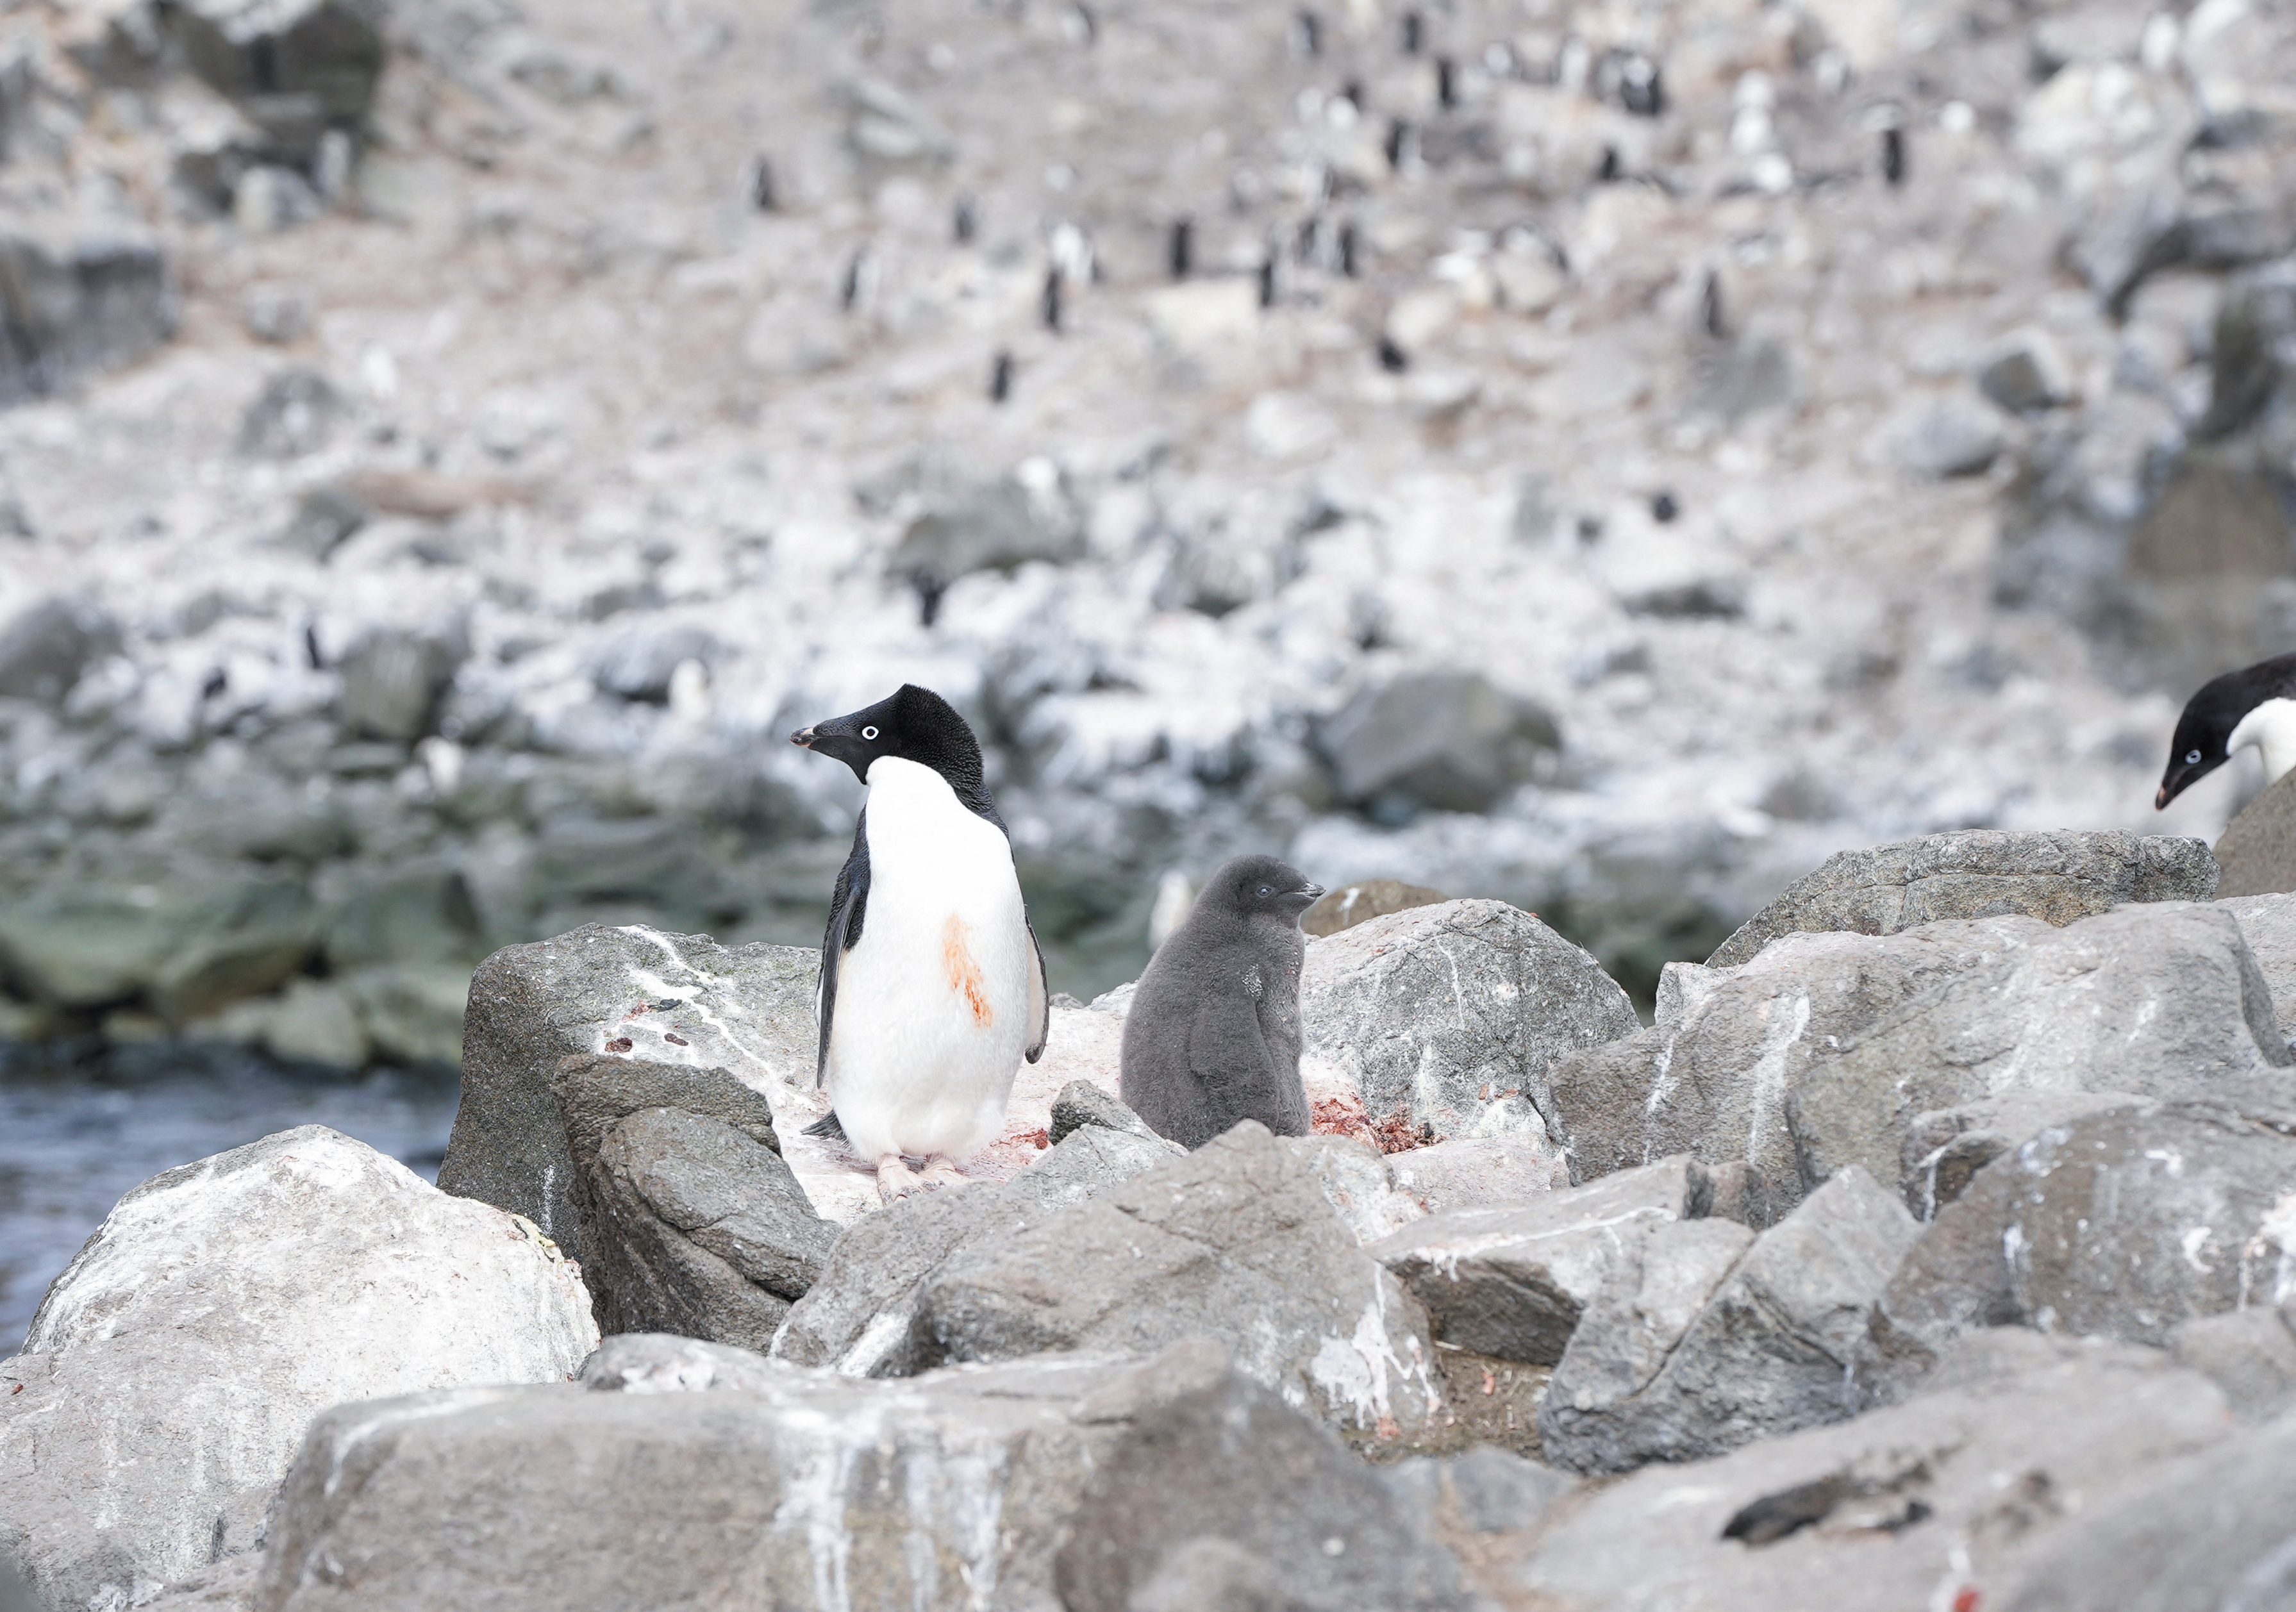 Scientists investigate impact of climate change on penguin colonies in Antarctica